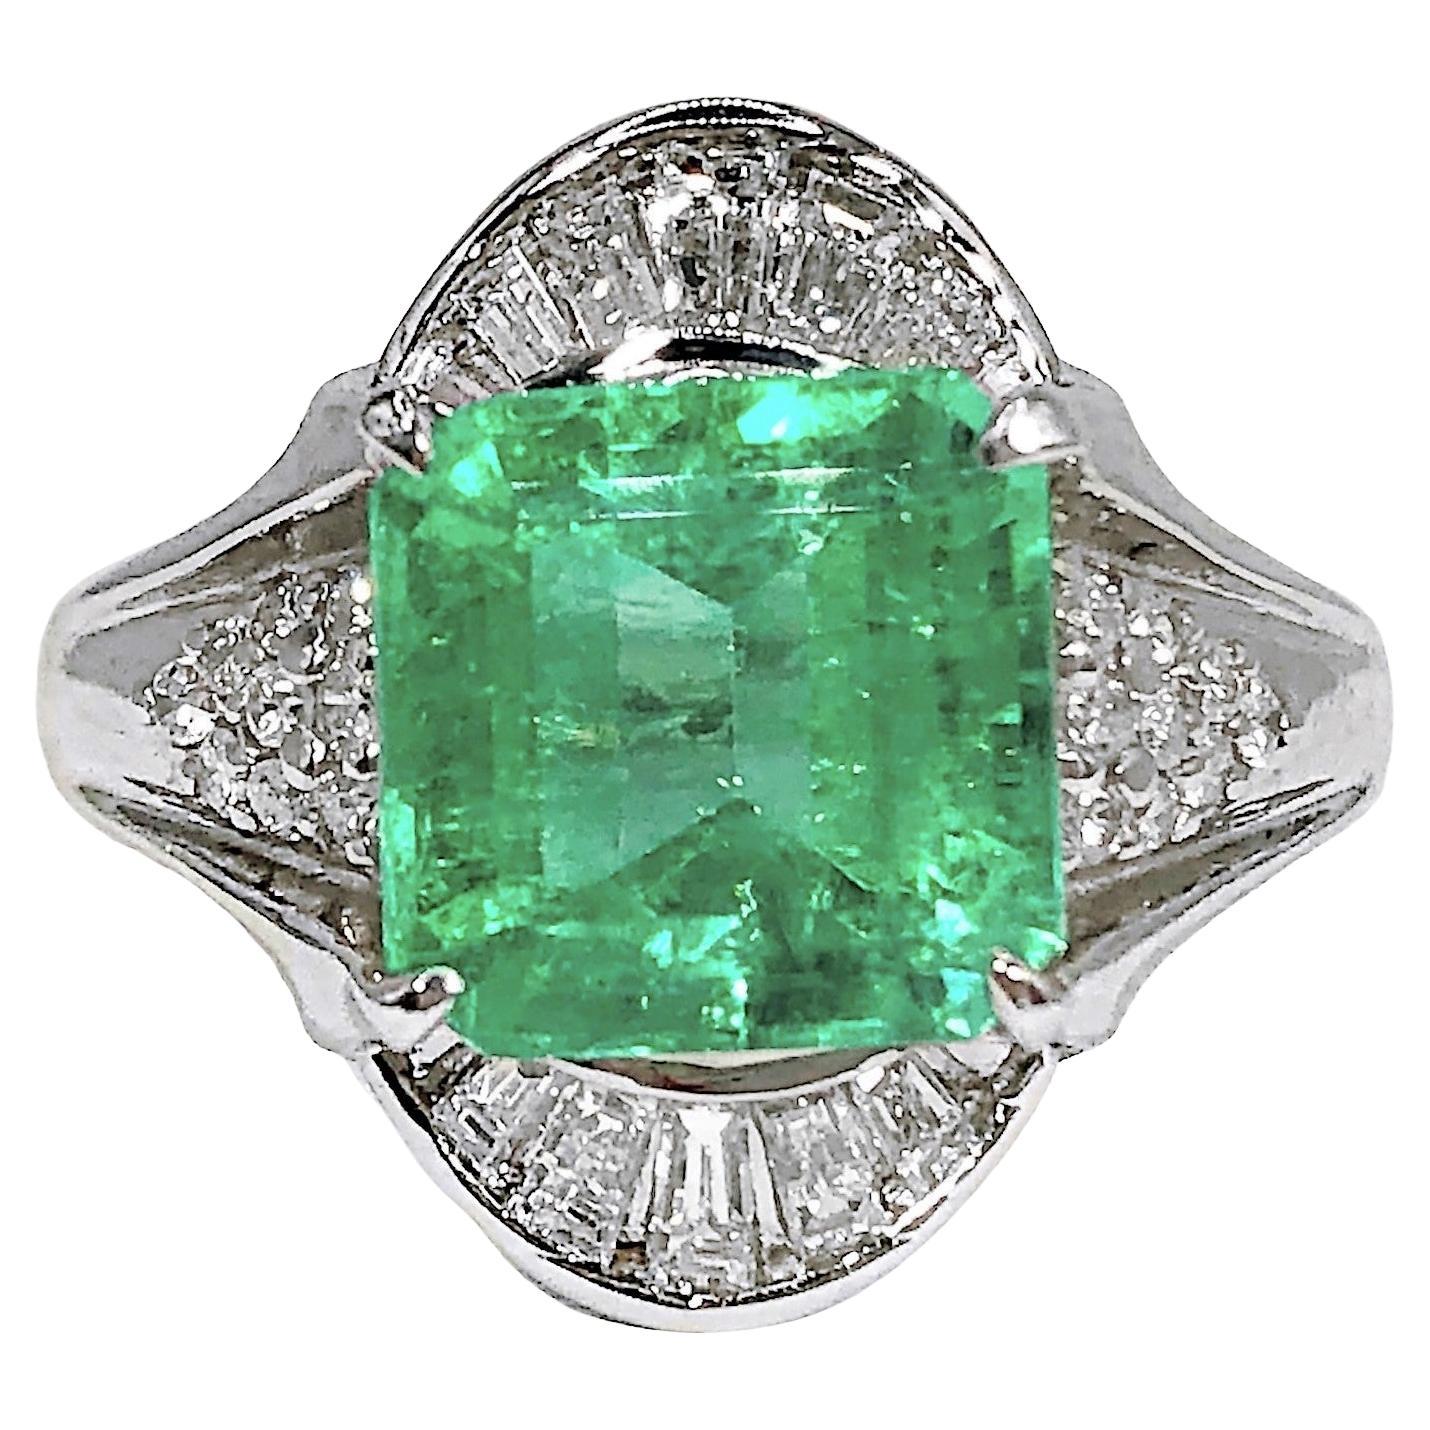 Contemporary Platinum Ring with 3.48ct Emerald and Diamonds